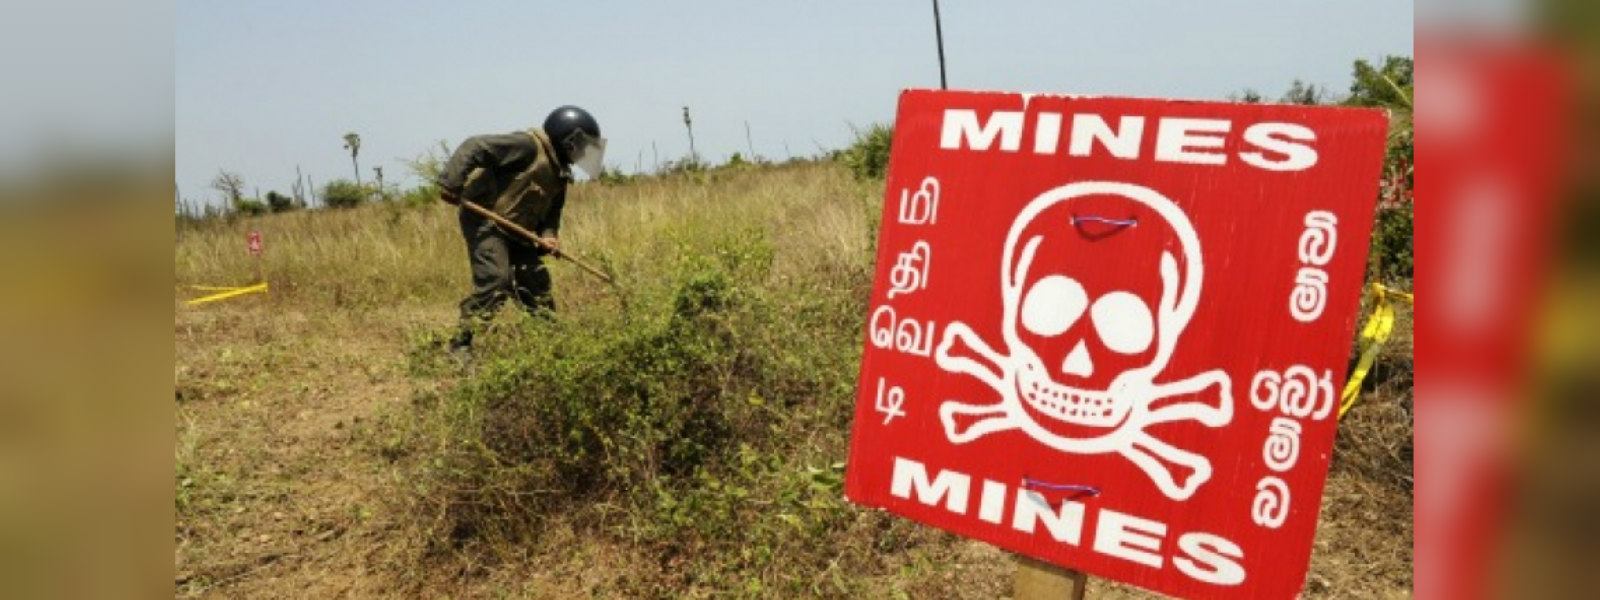 Australia to donate AUD 700,000 for mine clearance